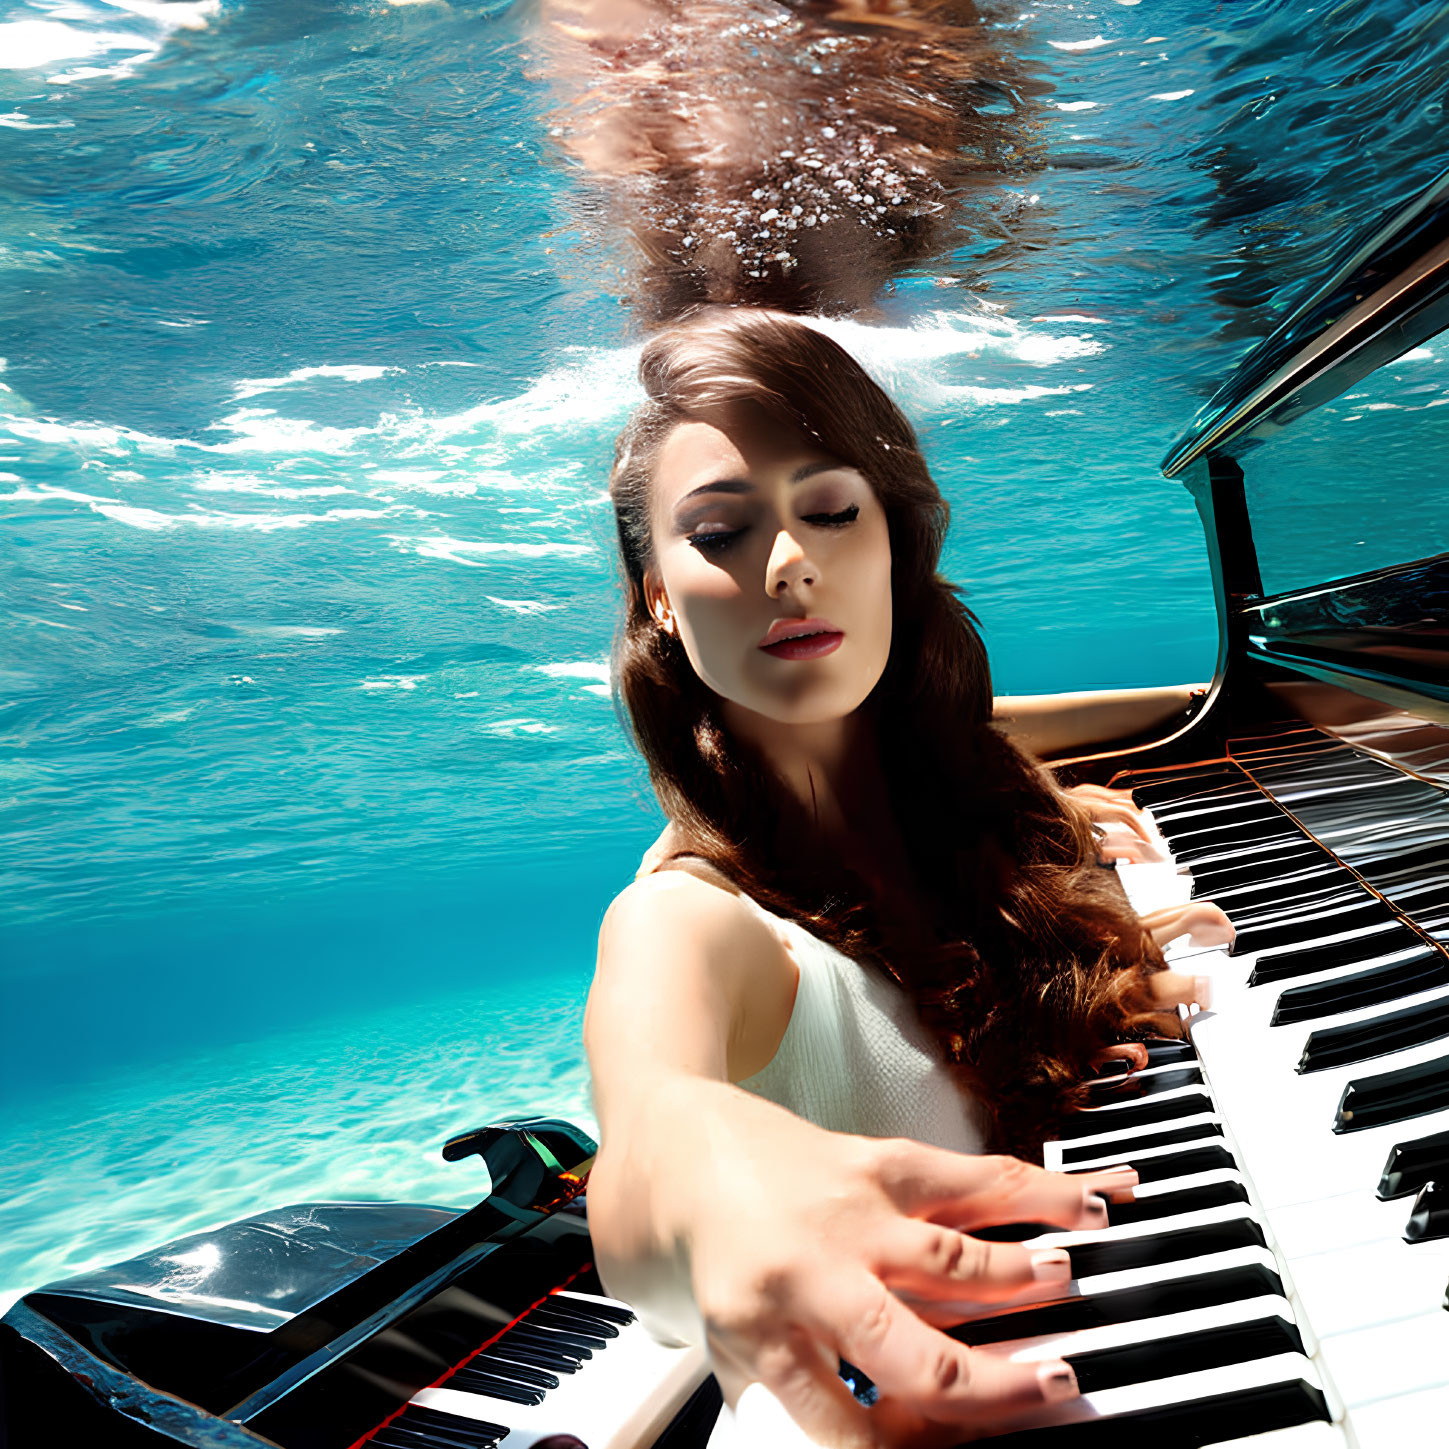 Woman Playing Piano Submerged in Blue Water